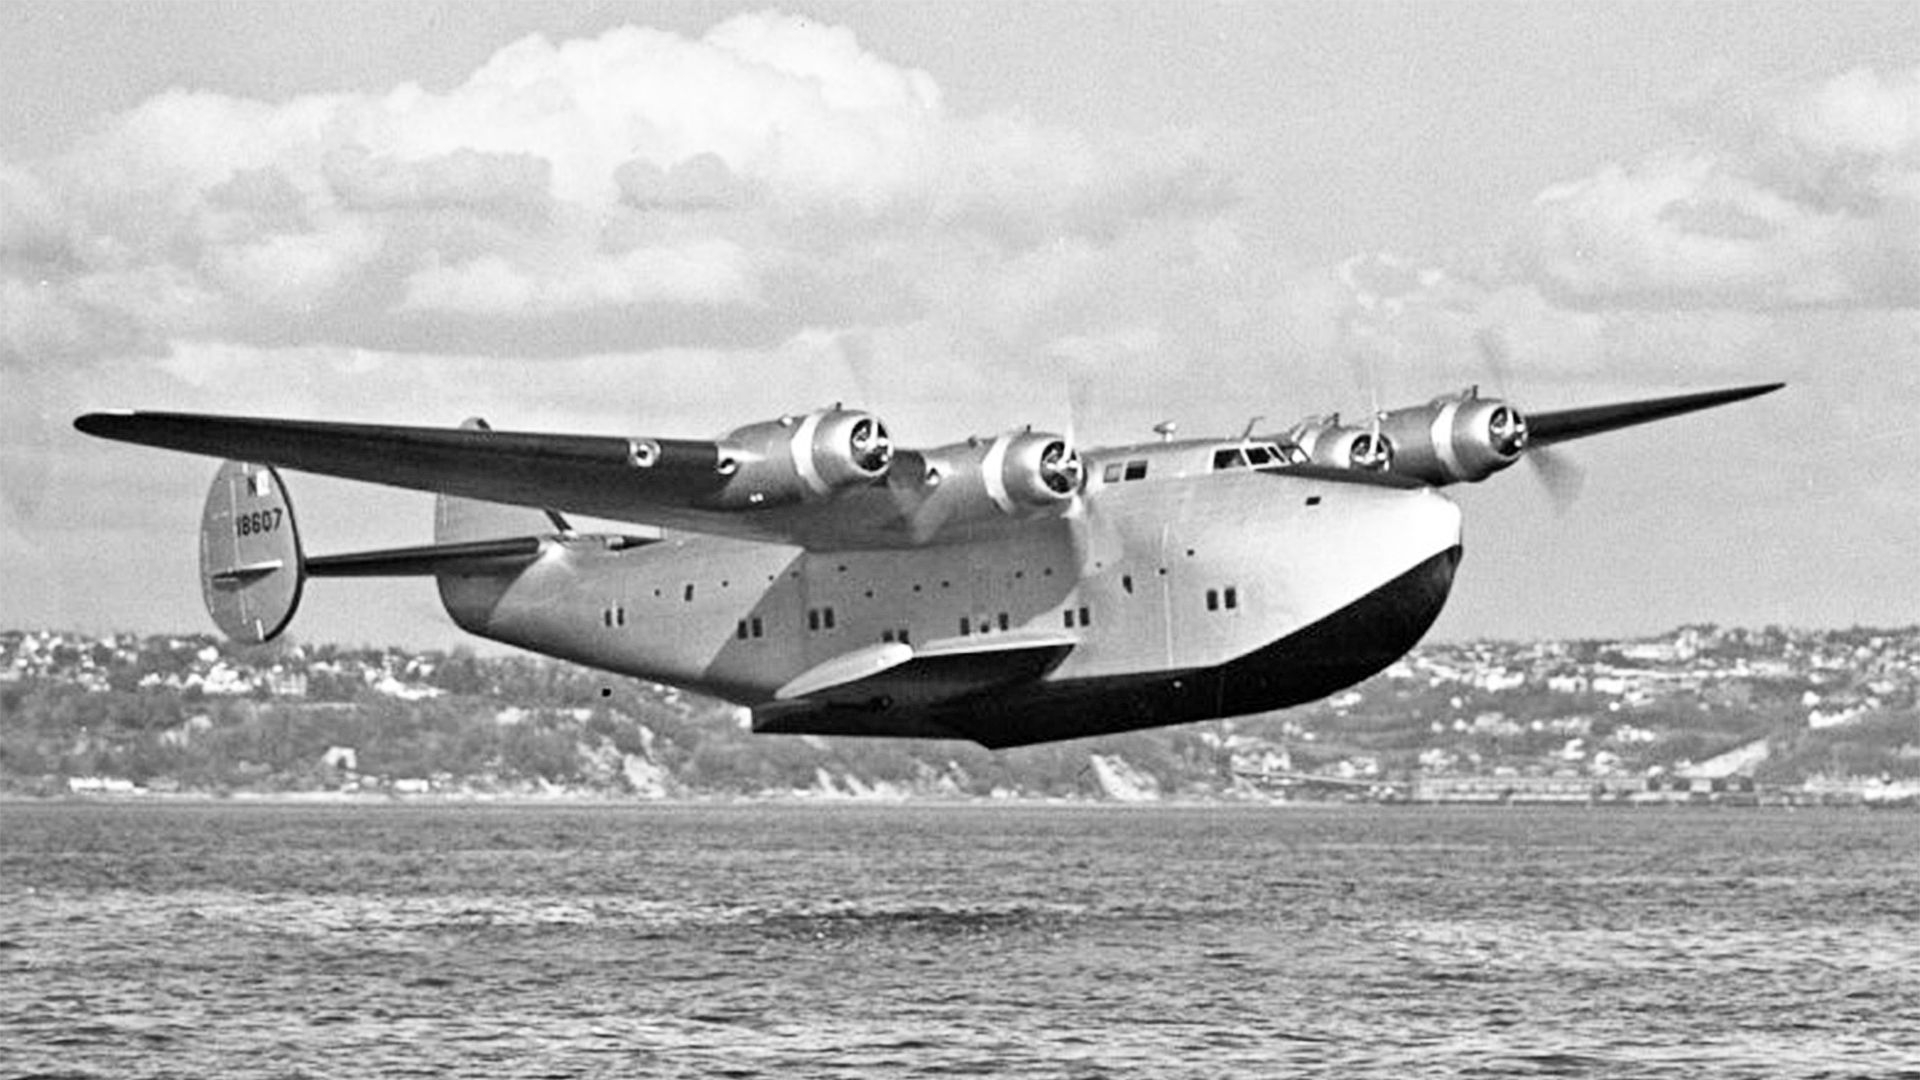 A Boeing 314 flying just above water.